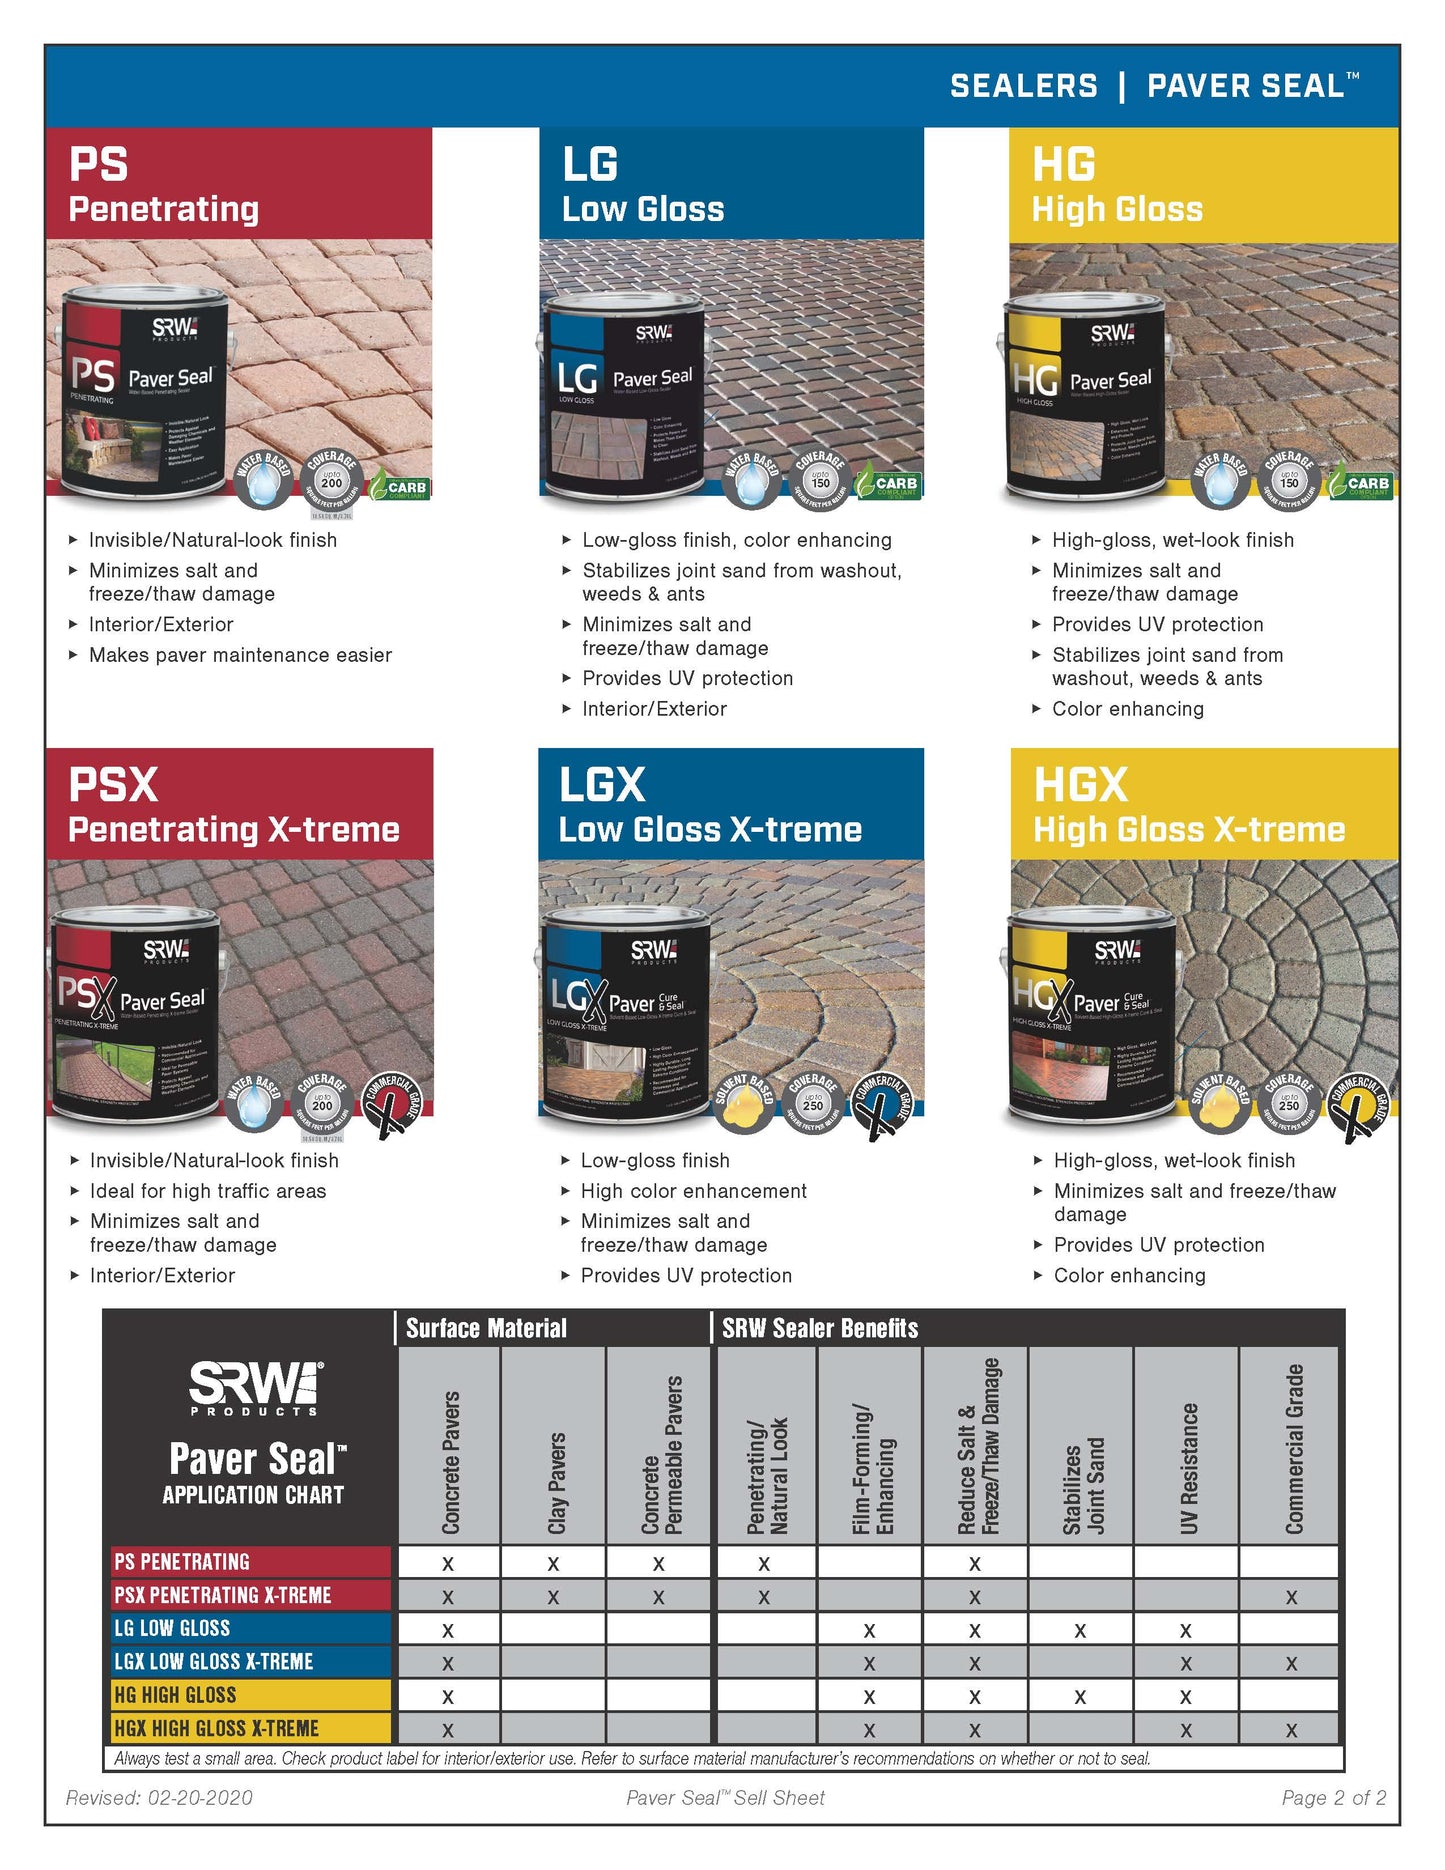 SRW Products PS Penetrating Sealer